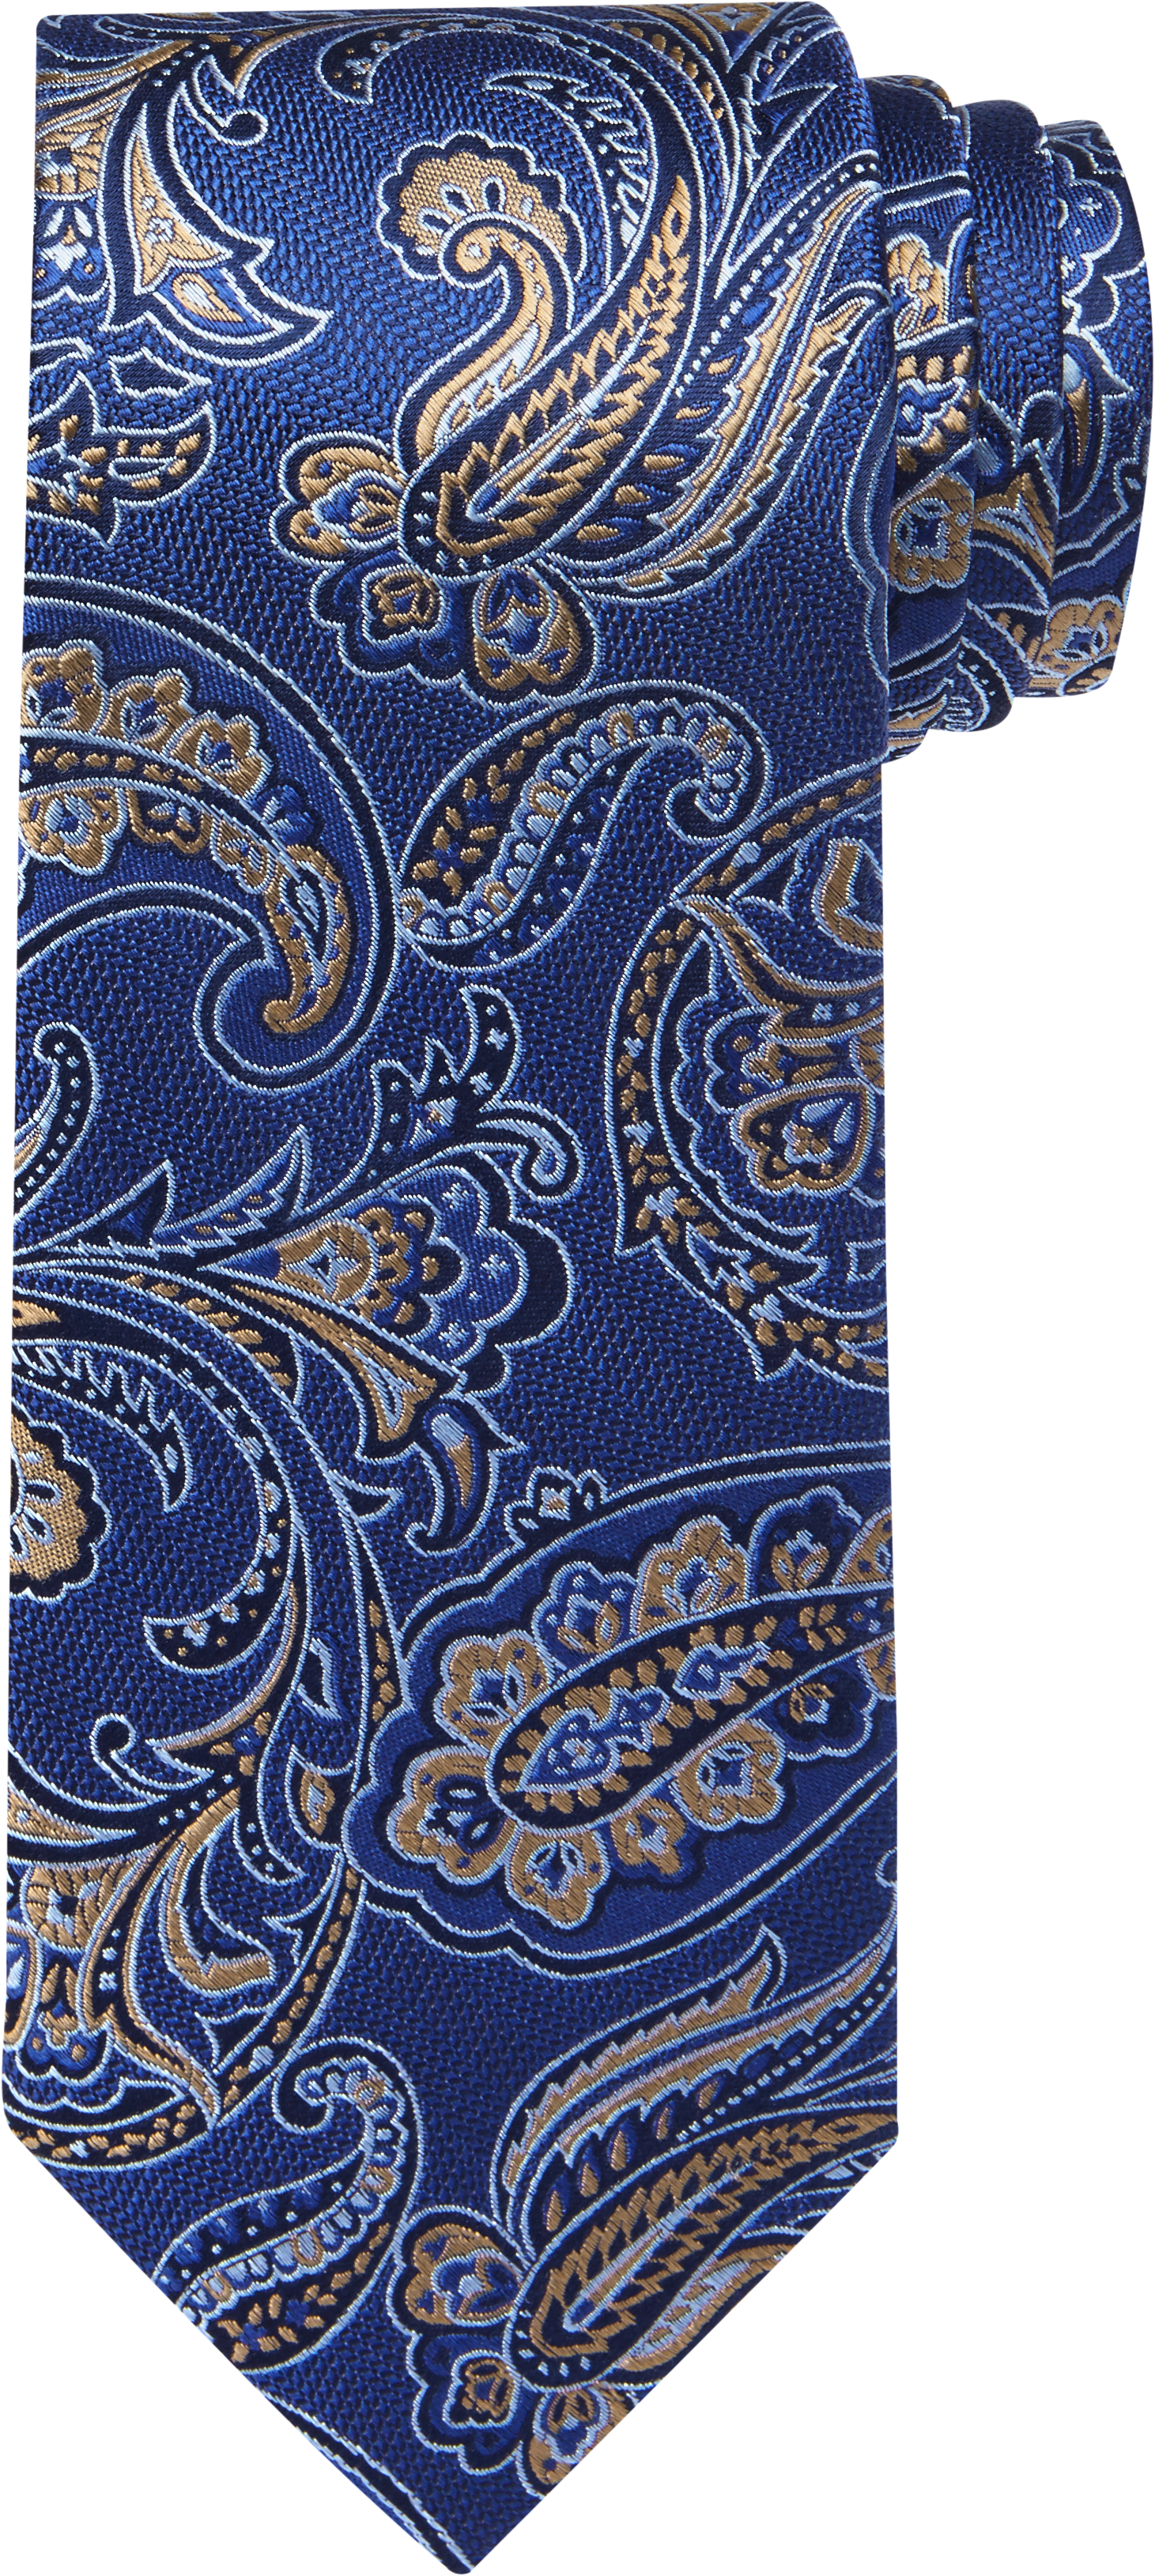 Reserve Collection Paisley Floral Tie - Long CLEARANCE - Ties | Jos A Bank